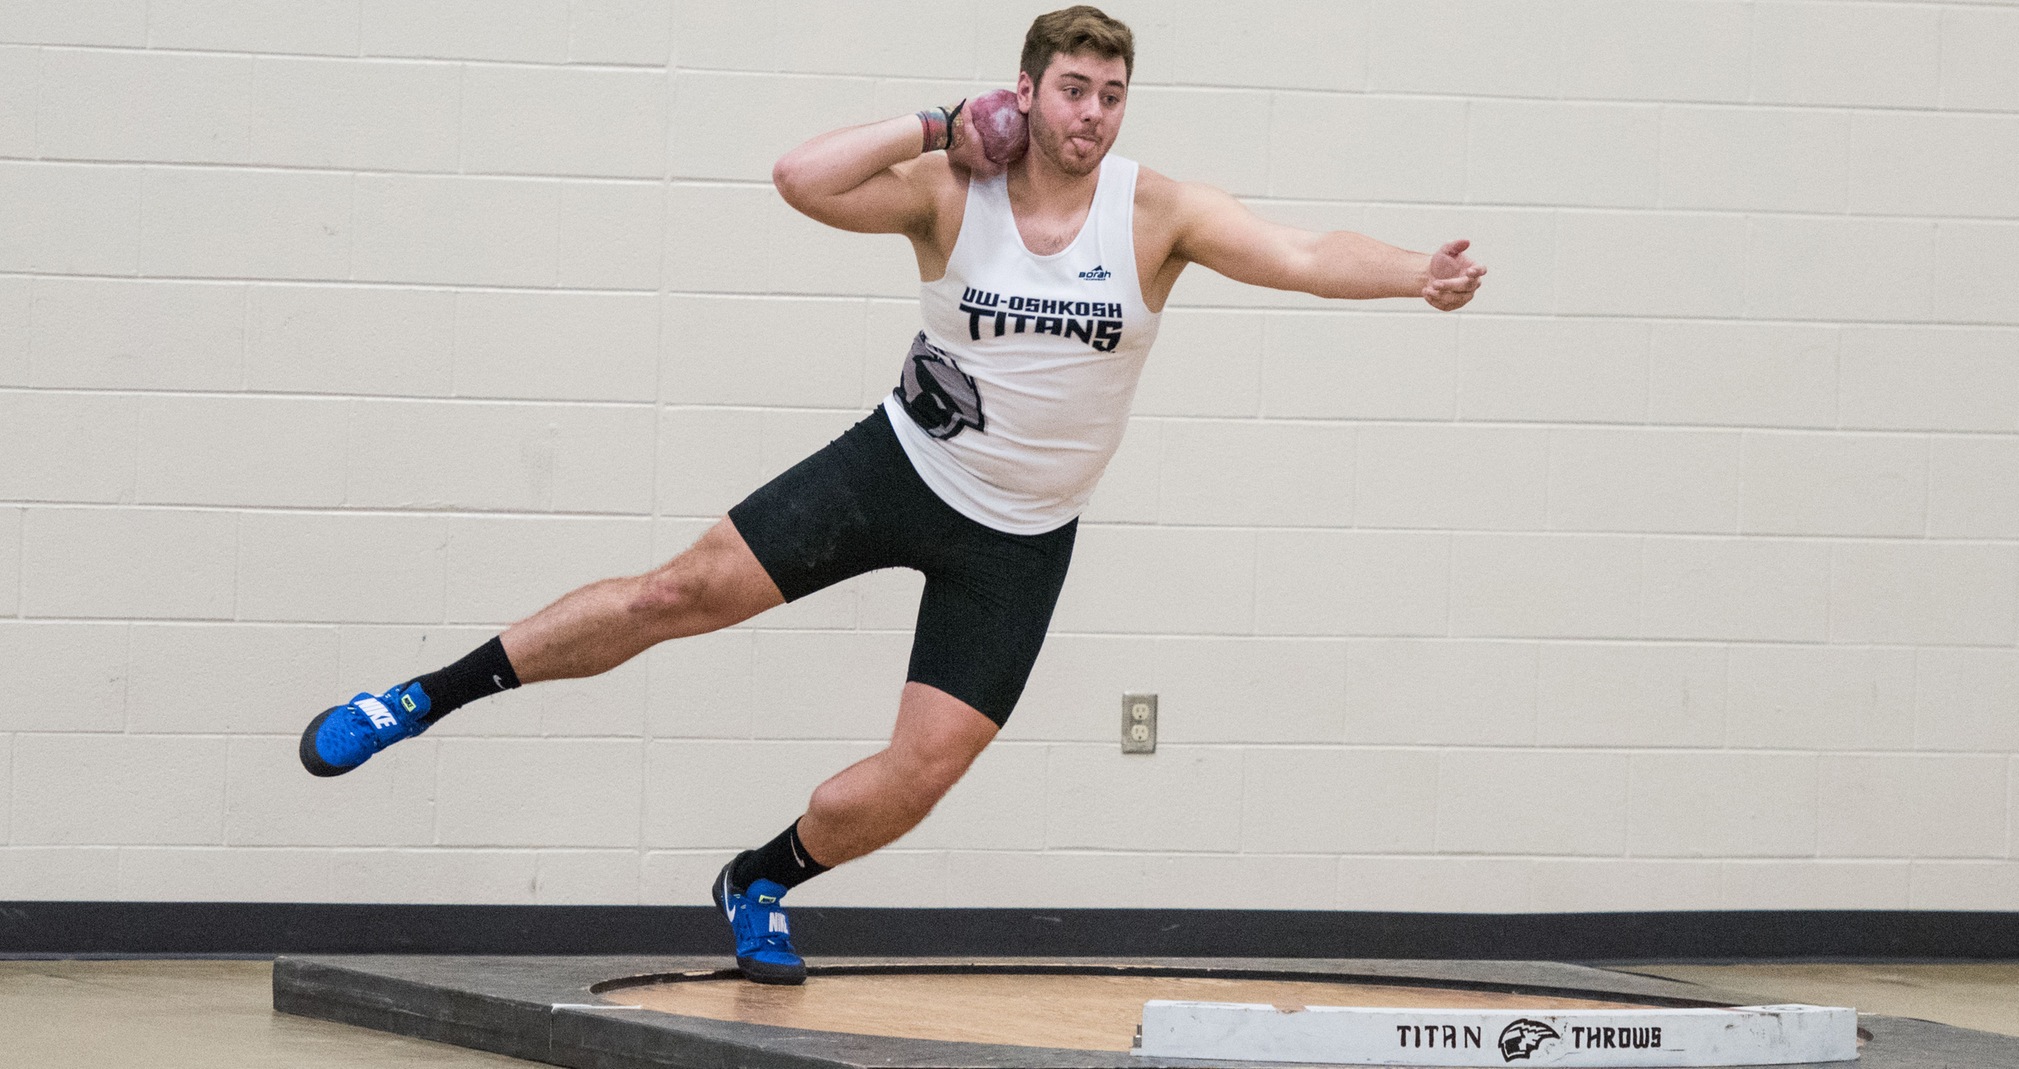 Bailey Quinn won the 35-pound weight throw while placing fourth in the shot put against Lawrence University.